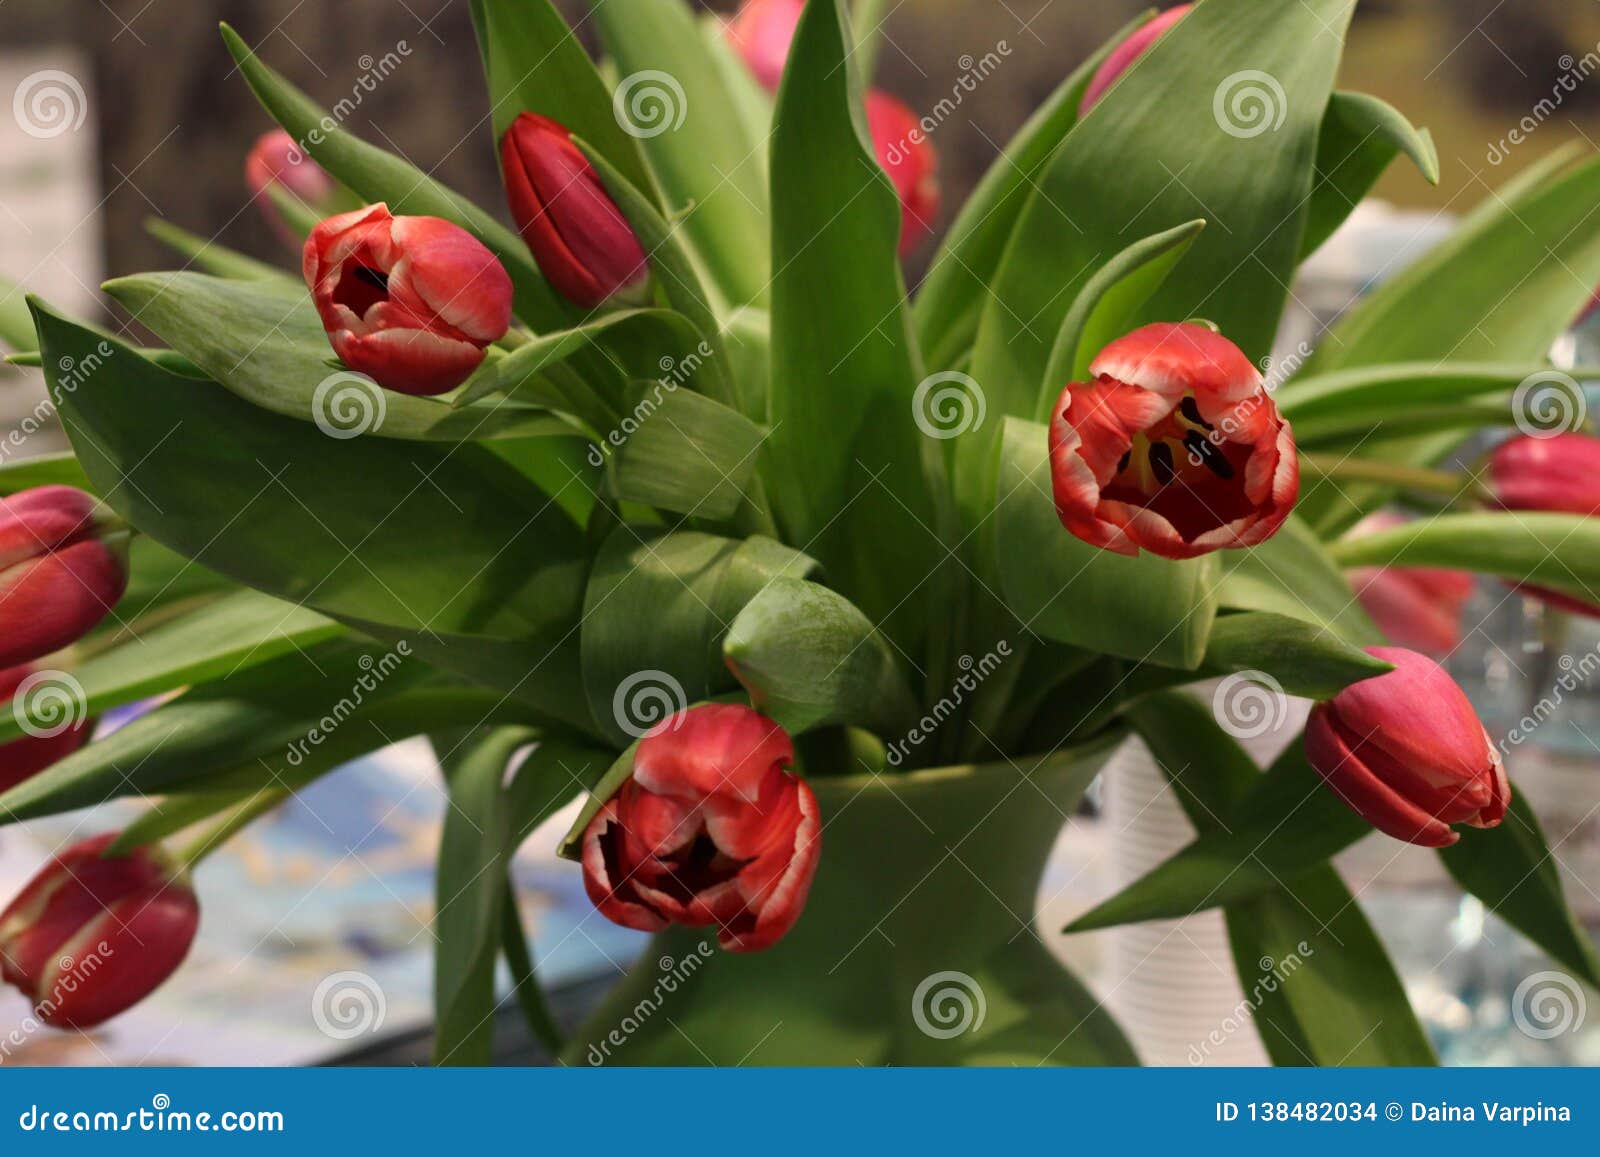 Red Tulips in a Vase. a Sweet and Simple Expression of Love. Stock ...